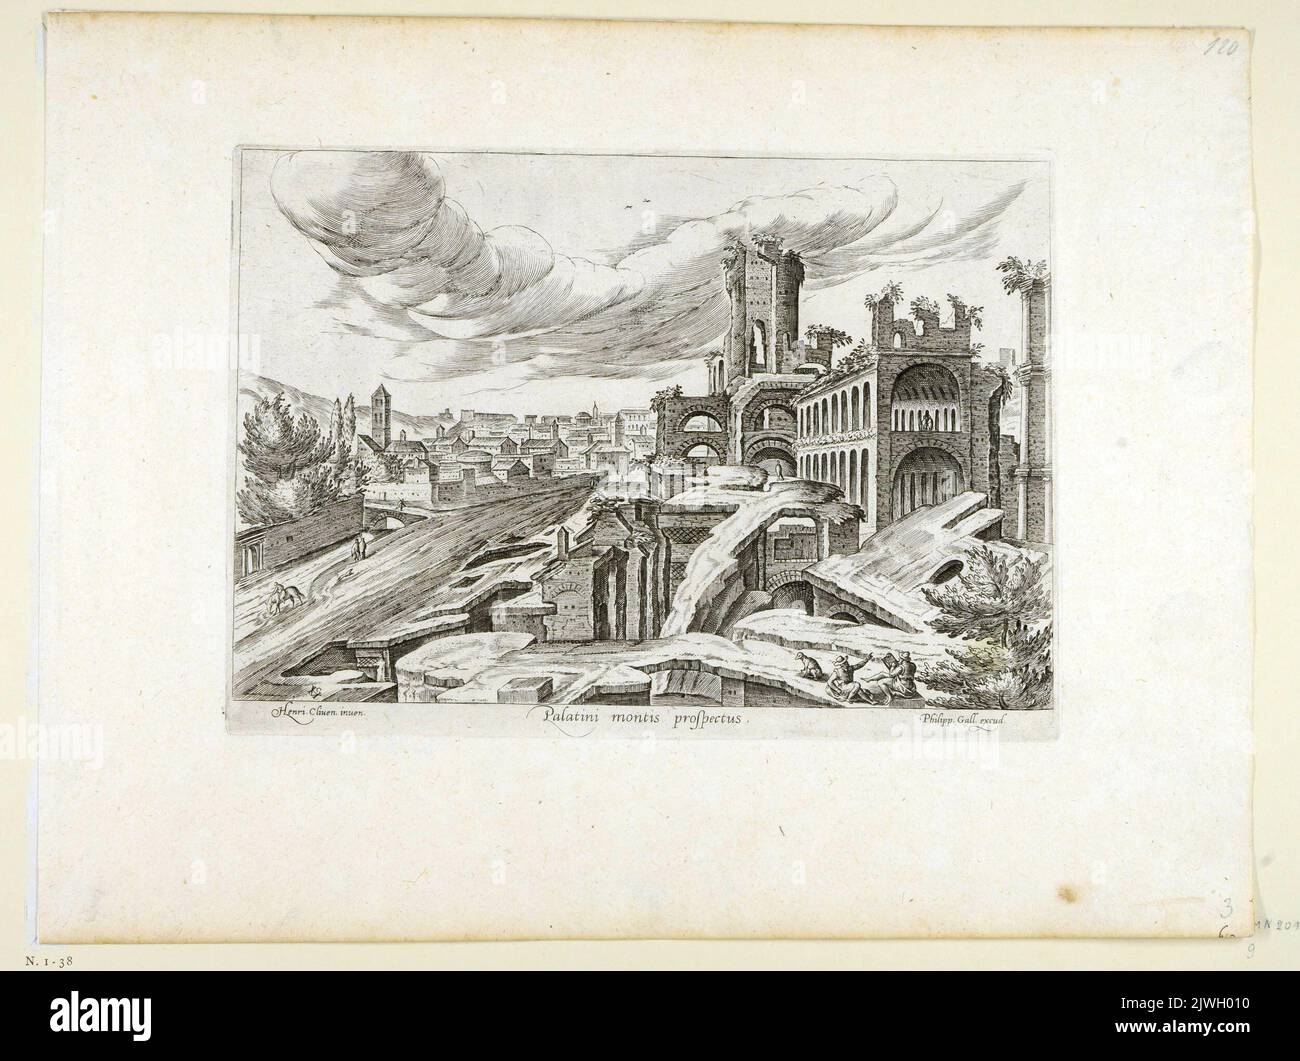 View of the ruins of the Palatine Hill - Palatini montis prospectus; at the bottom on the right - the Artist sketching the view. Galle, Theodor (1571-1633), graphic artist, Galle, Philips (1537-1612), graphic artist, Cleve, Hendrick van, III (ca 1525-1589), draughtsman, cartoonist Stock Photo